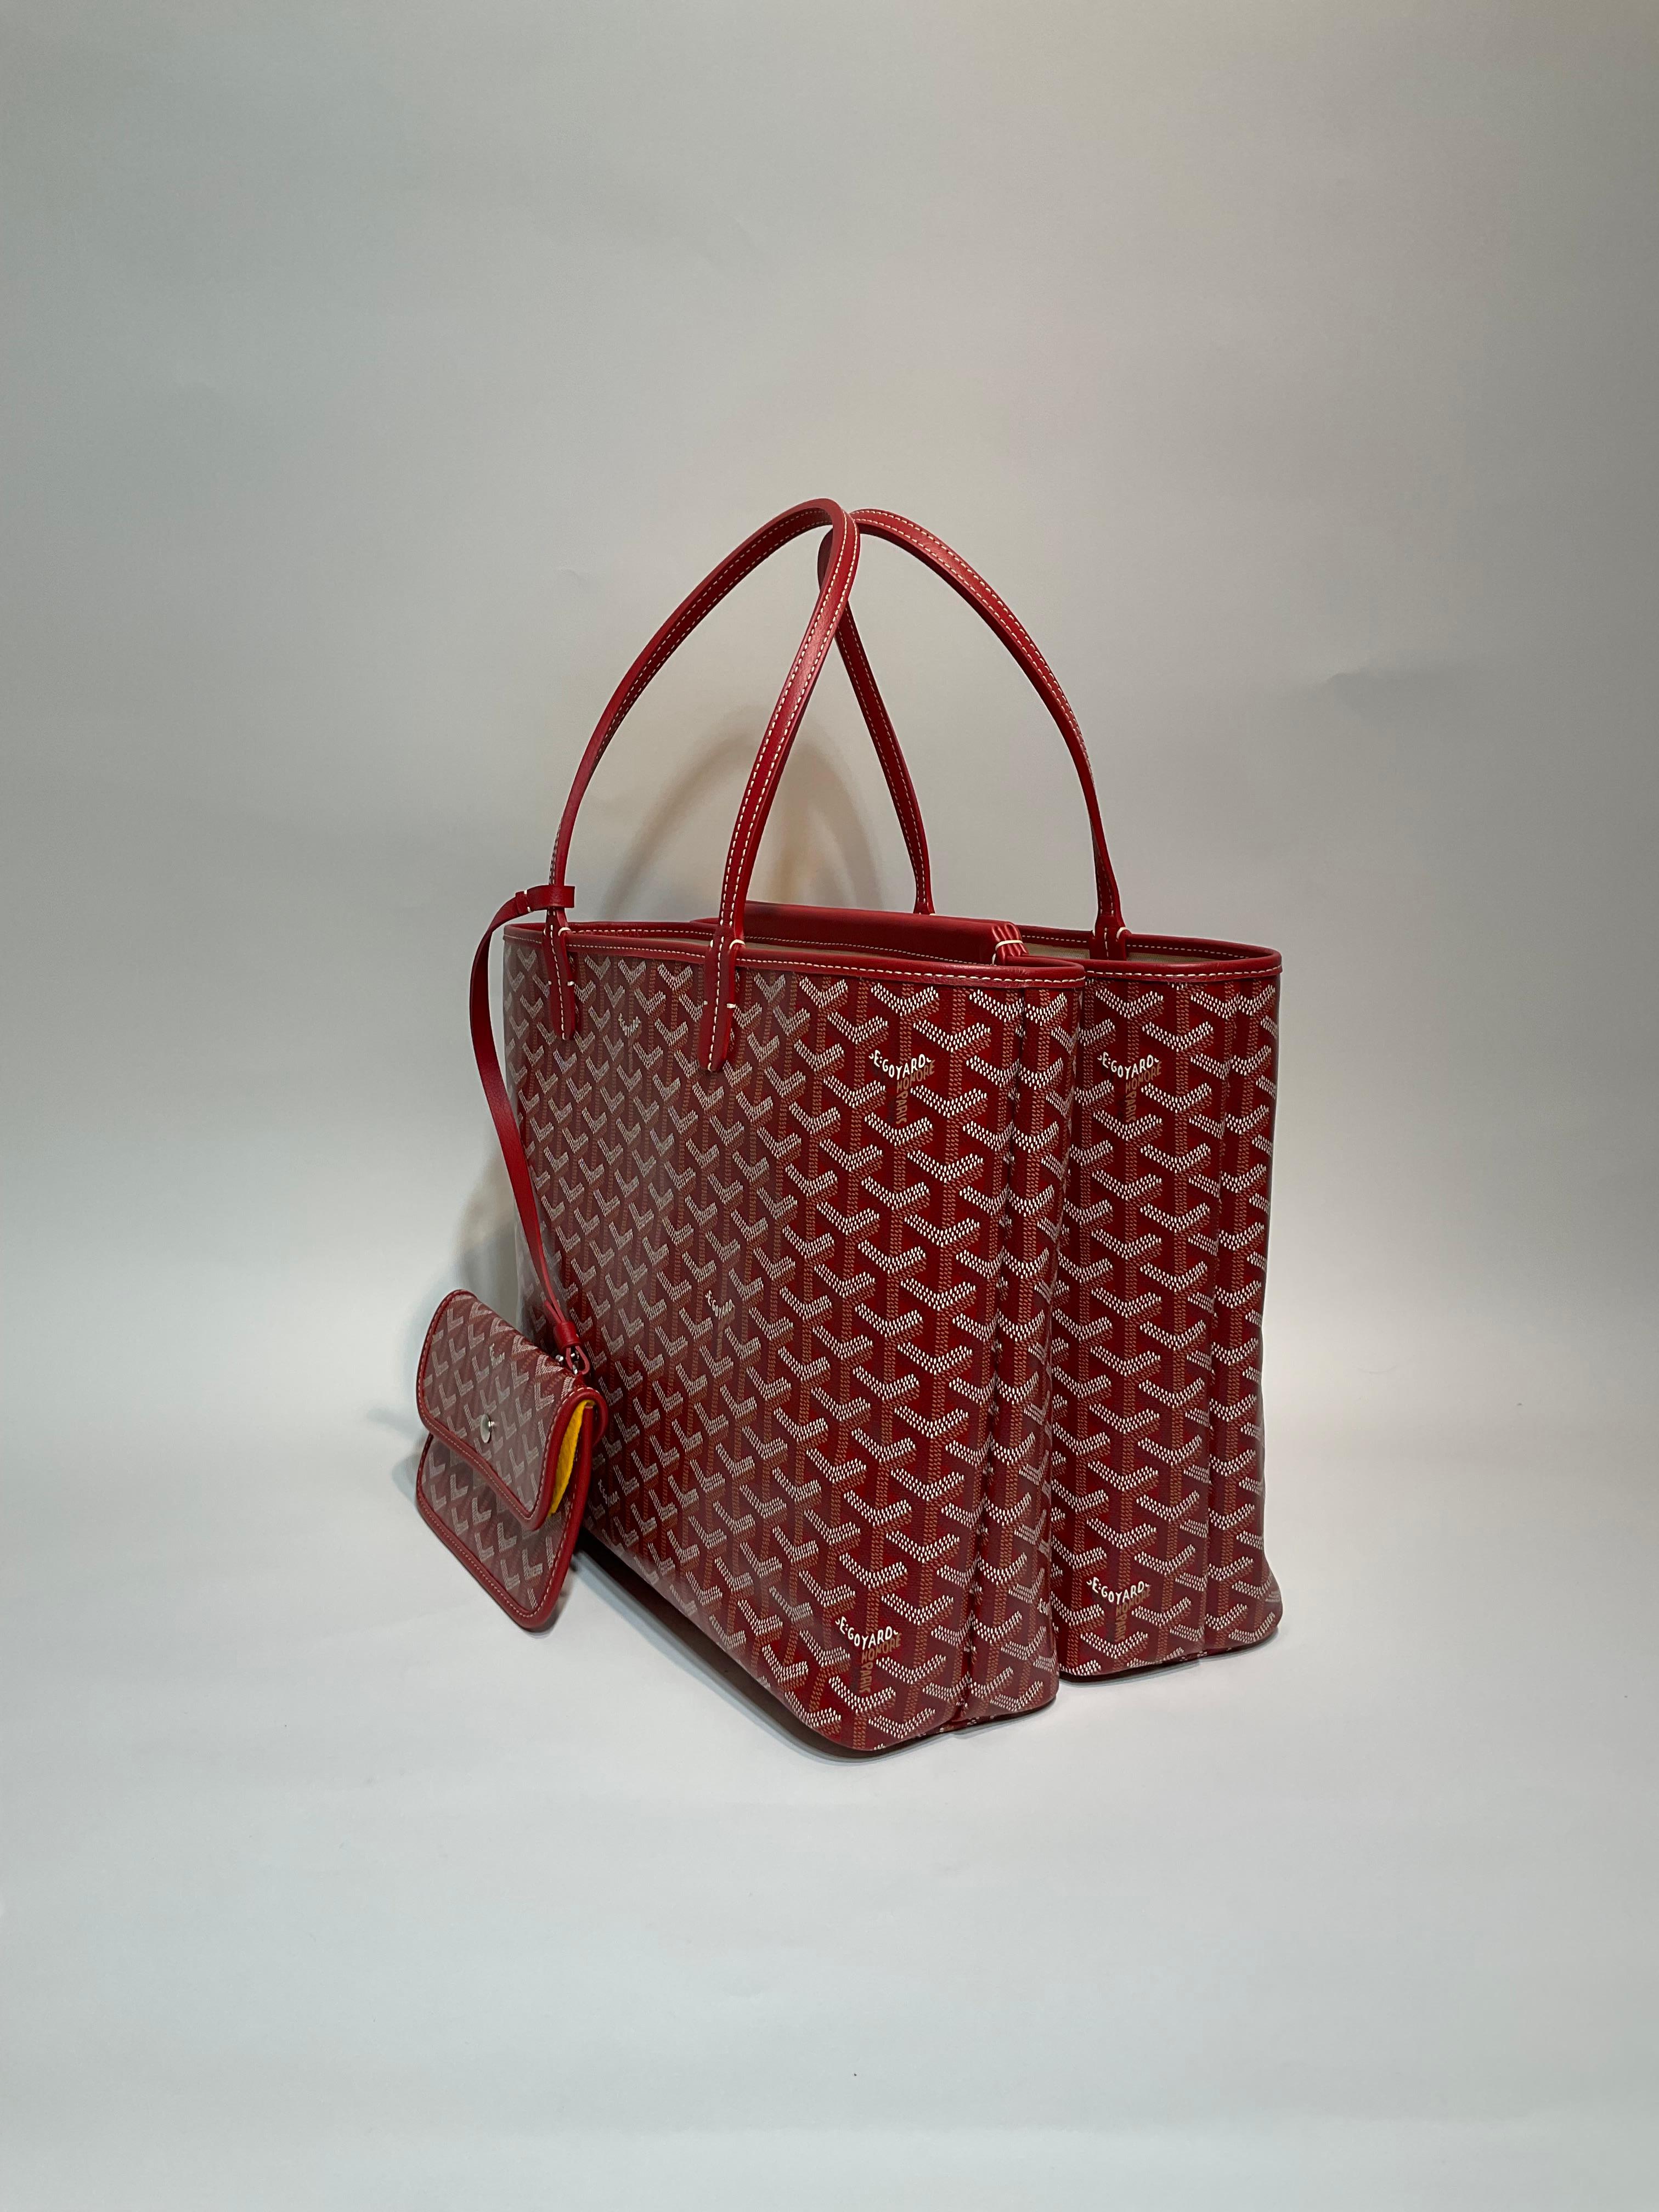 Goyard Red Isabelle PM Tote- Pristine; appears never carried. 
Goyard Red Goyardine chevron patterned coated canvas tote is roomier than the Saint Louis PM.  With two large separate compartments and a central magnetic secure pocket, the Isabelle is